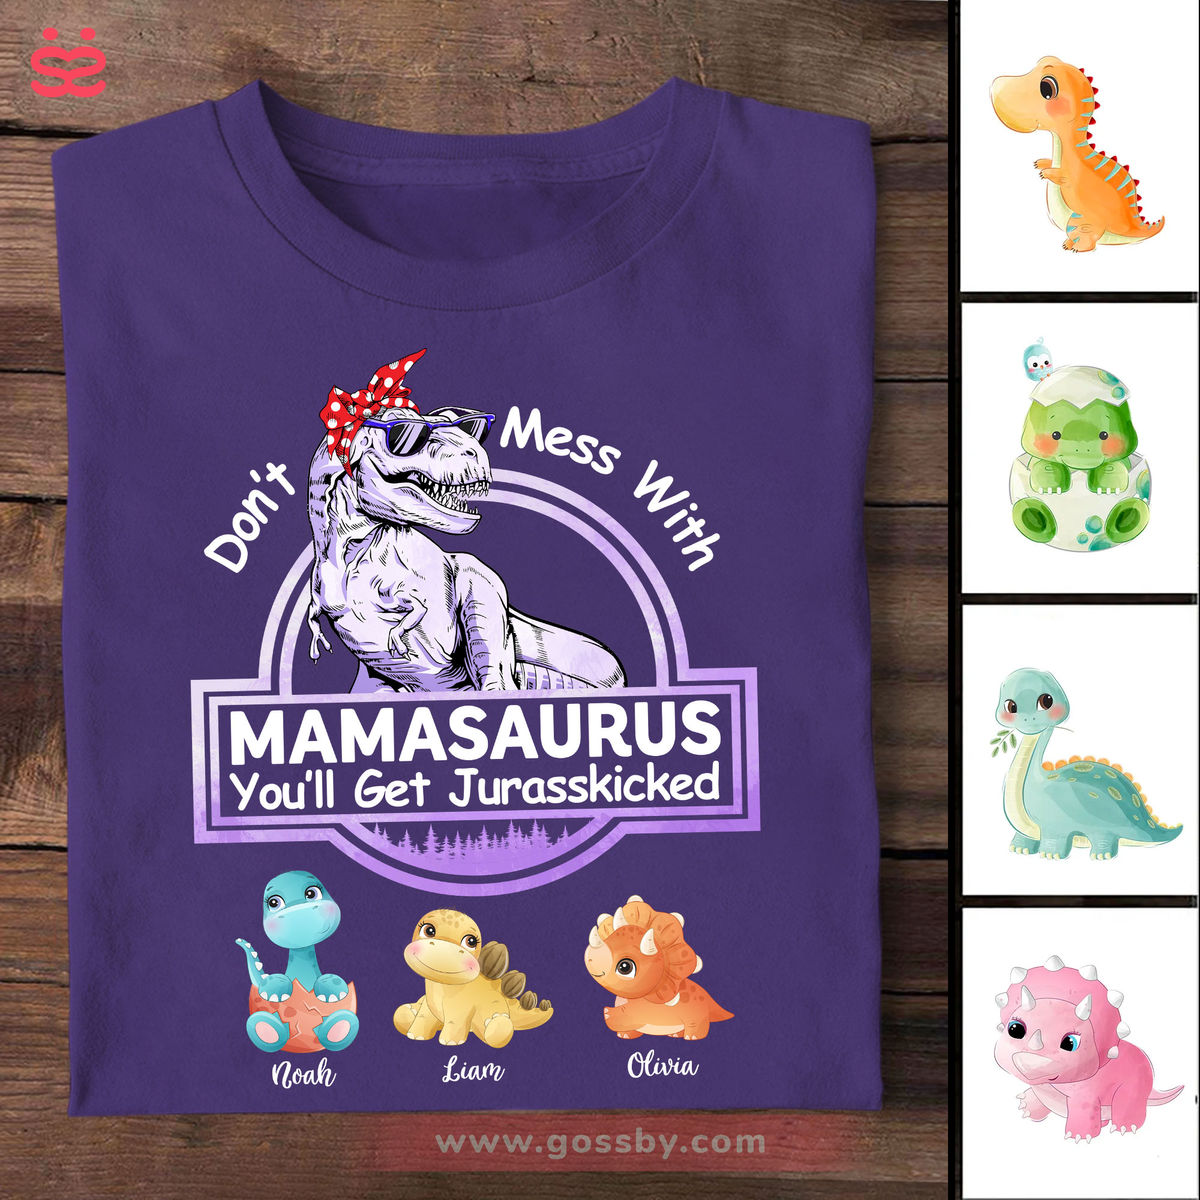 Personalized Shirt - Family - Don't Mess With Mamasaurus - Birthday Gift, Mother's Day Gift For Mom (Violet), Gifts For Mother